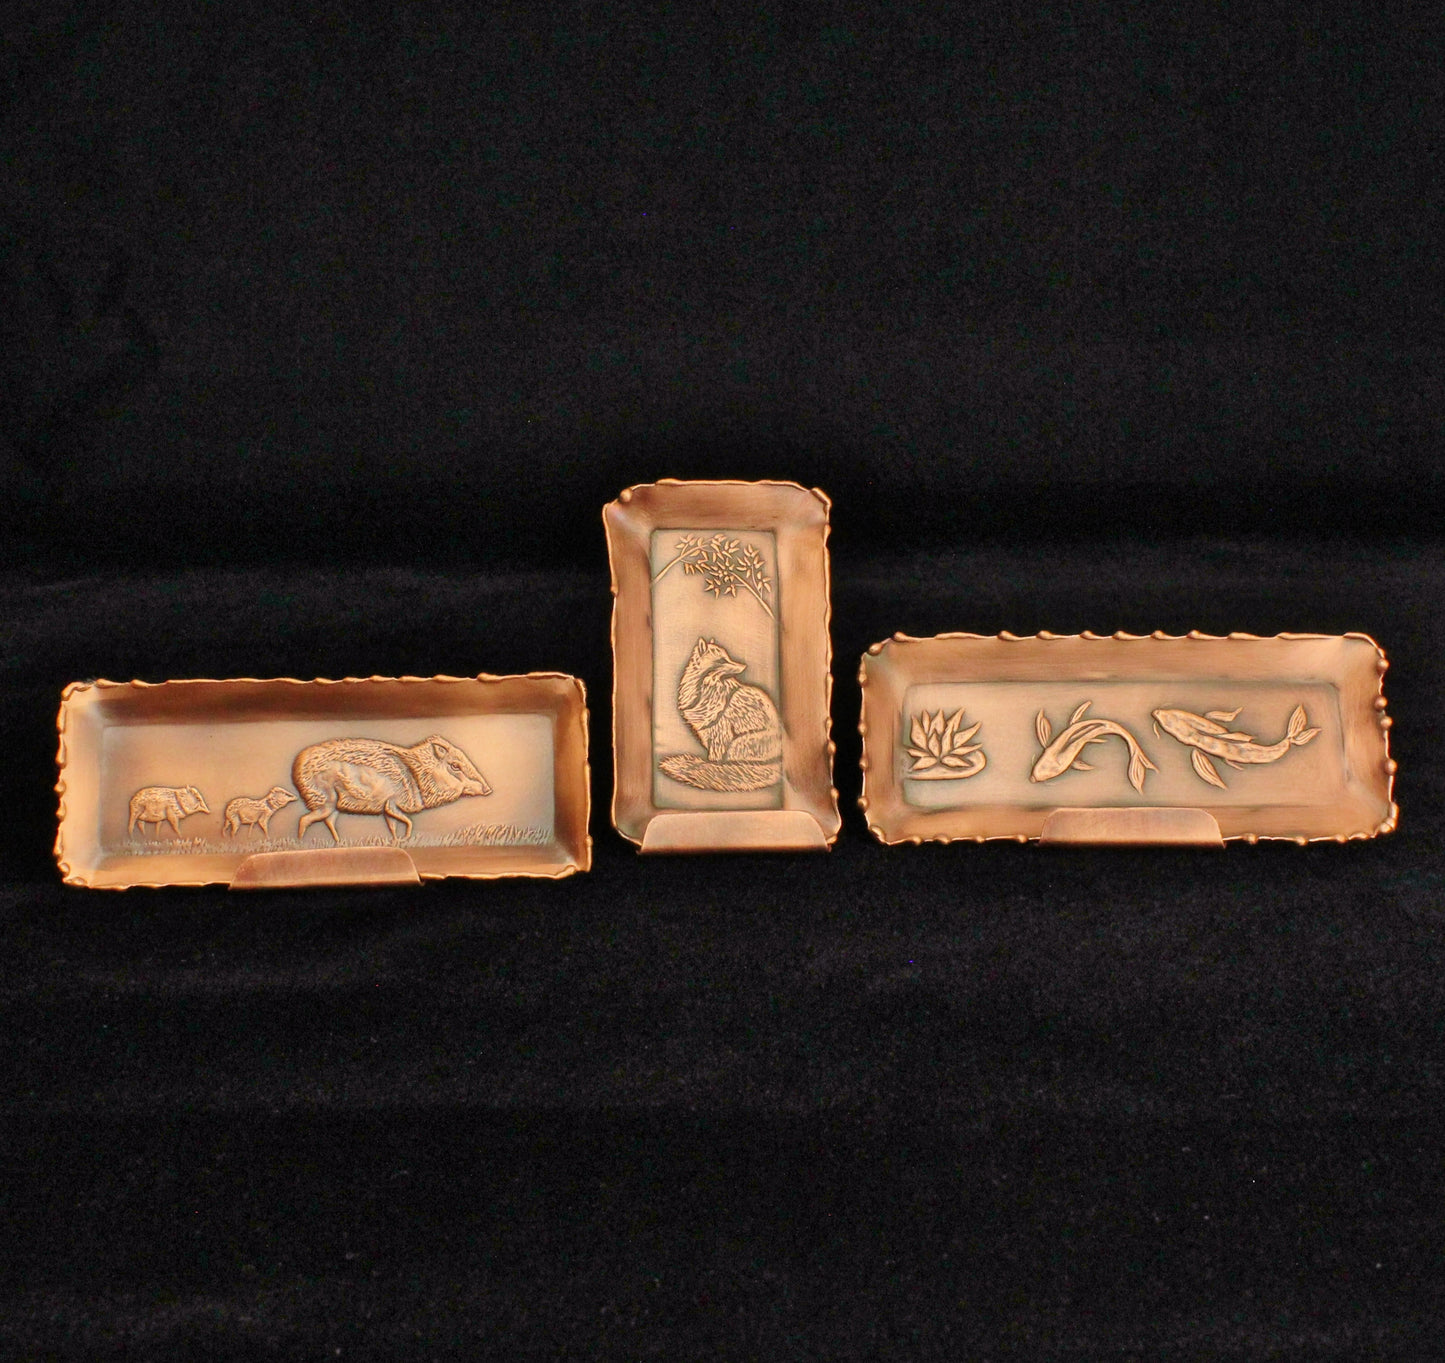 Copper Easel, Mini, For Displaying, 2" x 3.5" or 2" x 5" Mini Tiles/Trays.